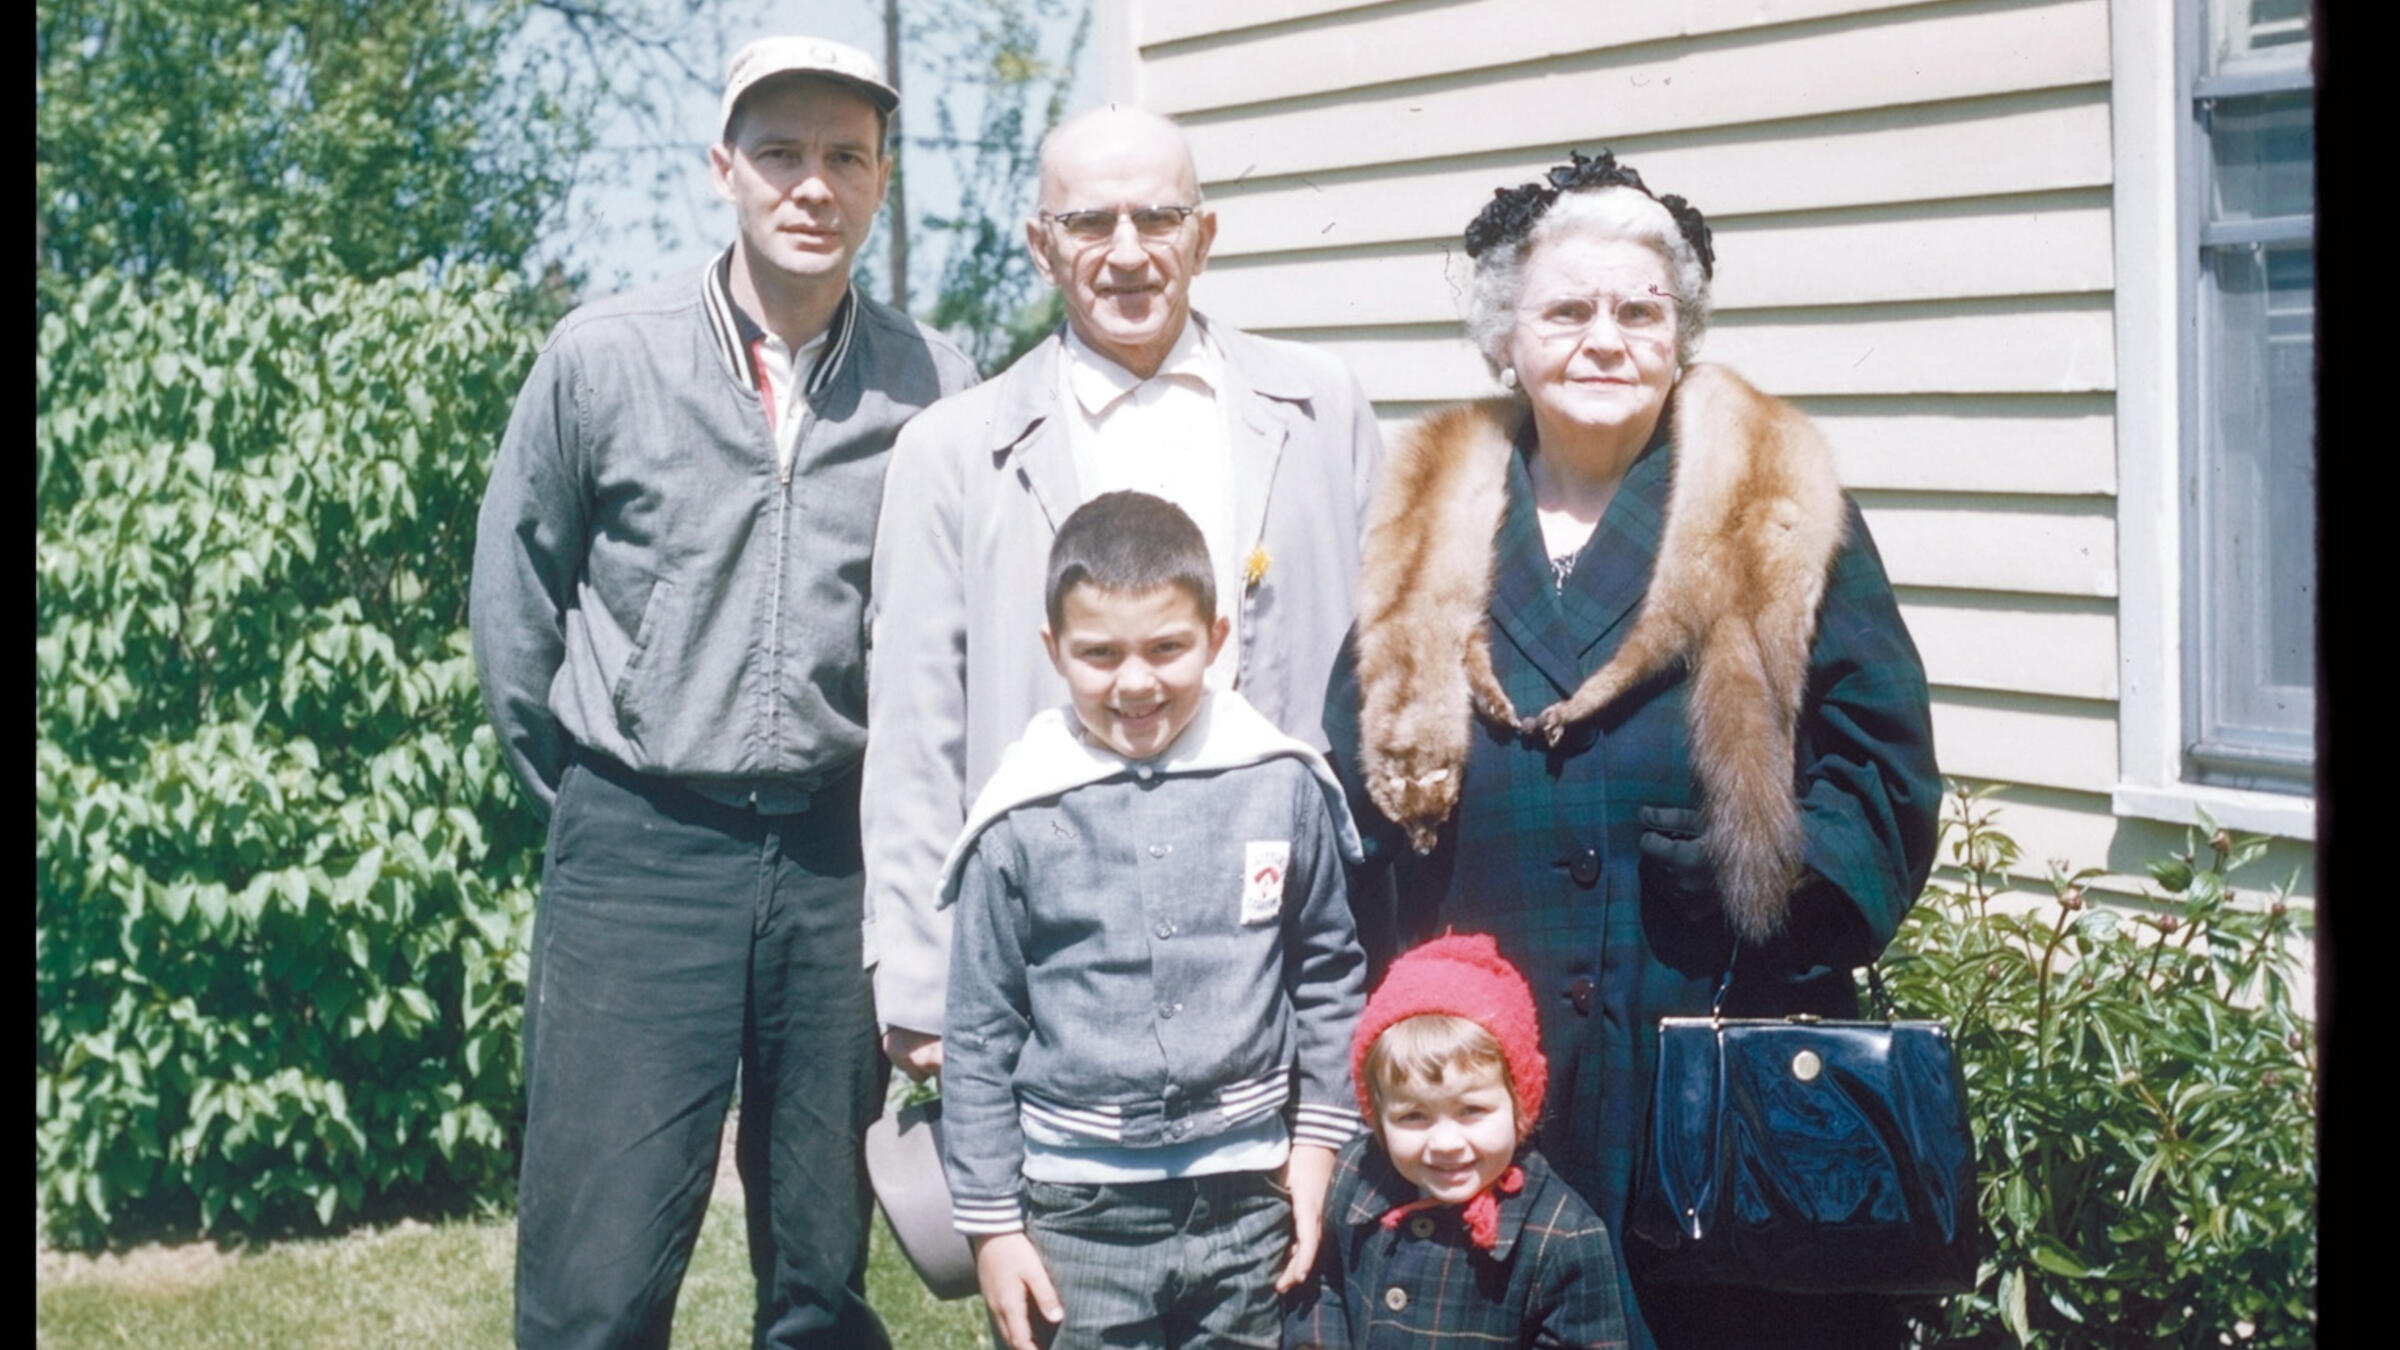 Steve with his maternal grandparents (the surveyor), father and sister.